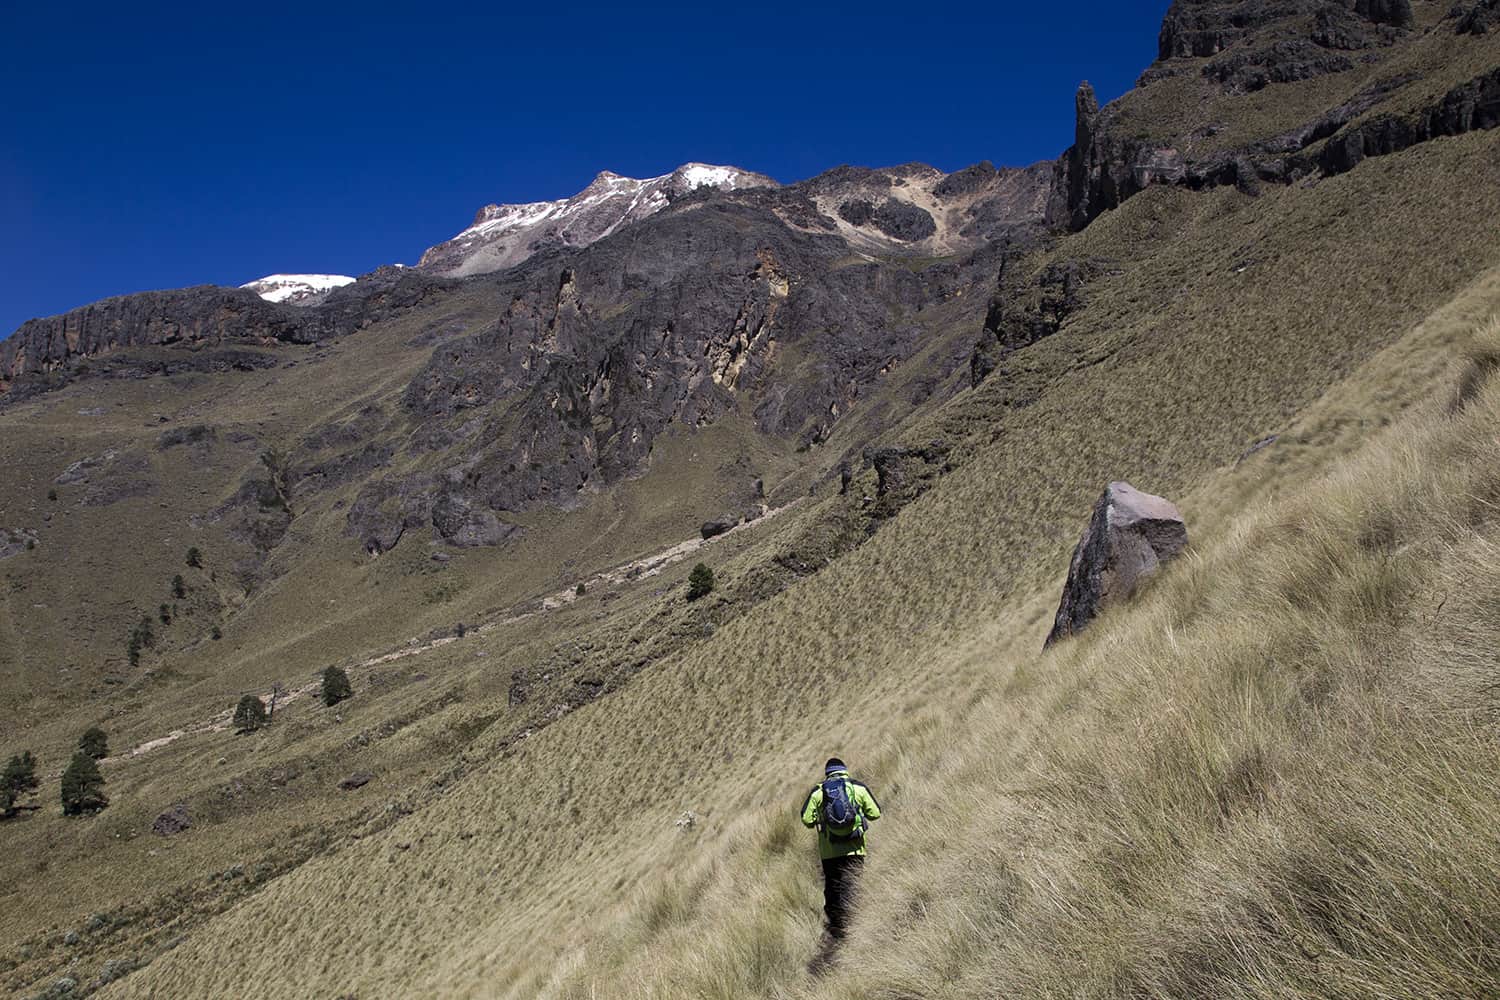 A guard walks along the slopes of IztaccÌhuatl mountain in the Izta-Popo National Park, Mexico on October 29, 2014. The graciars that crown IztaccÌhuatl are considered by experts as doomed to disappear in 10 years due to global warming.